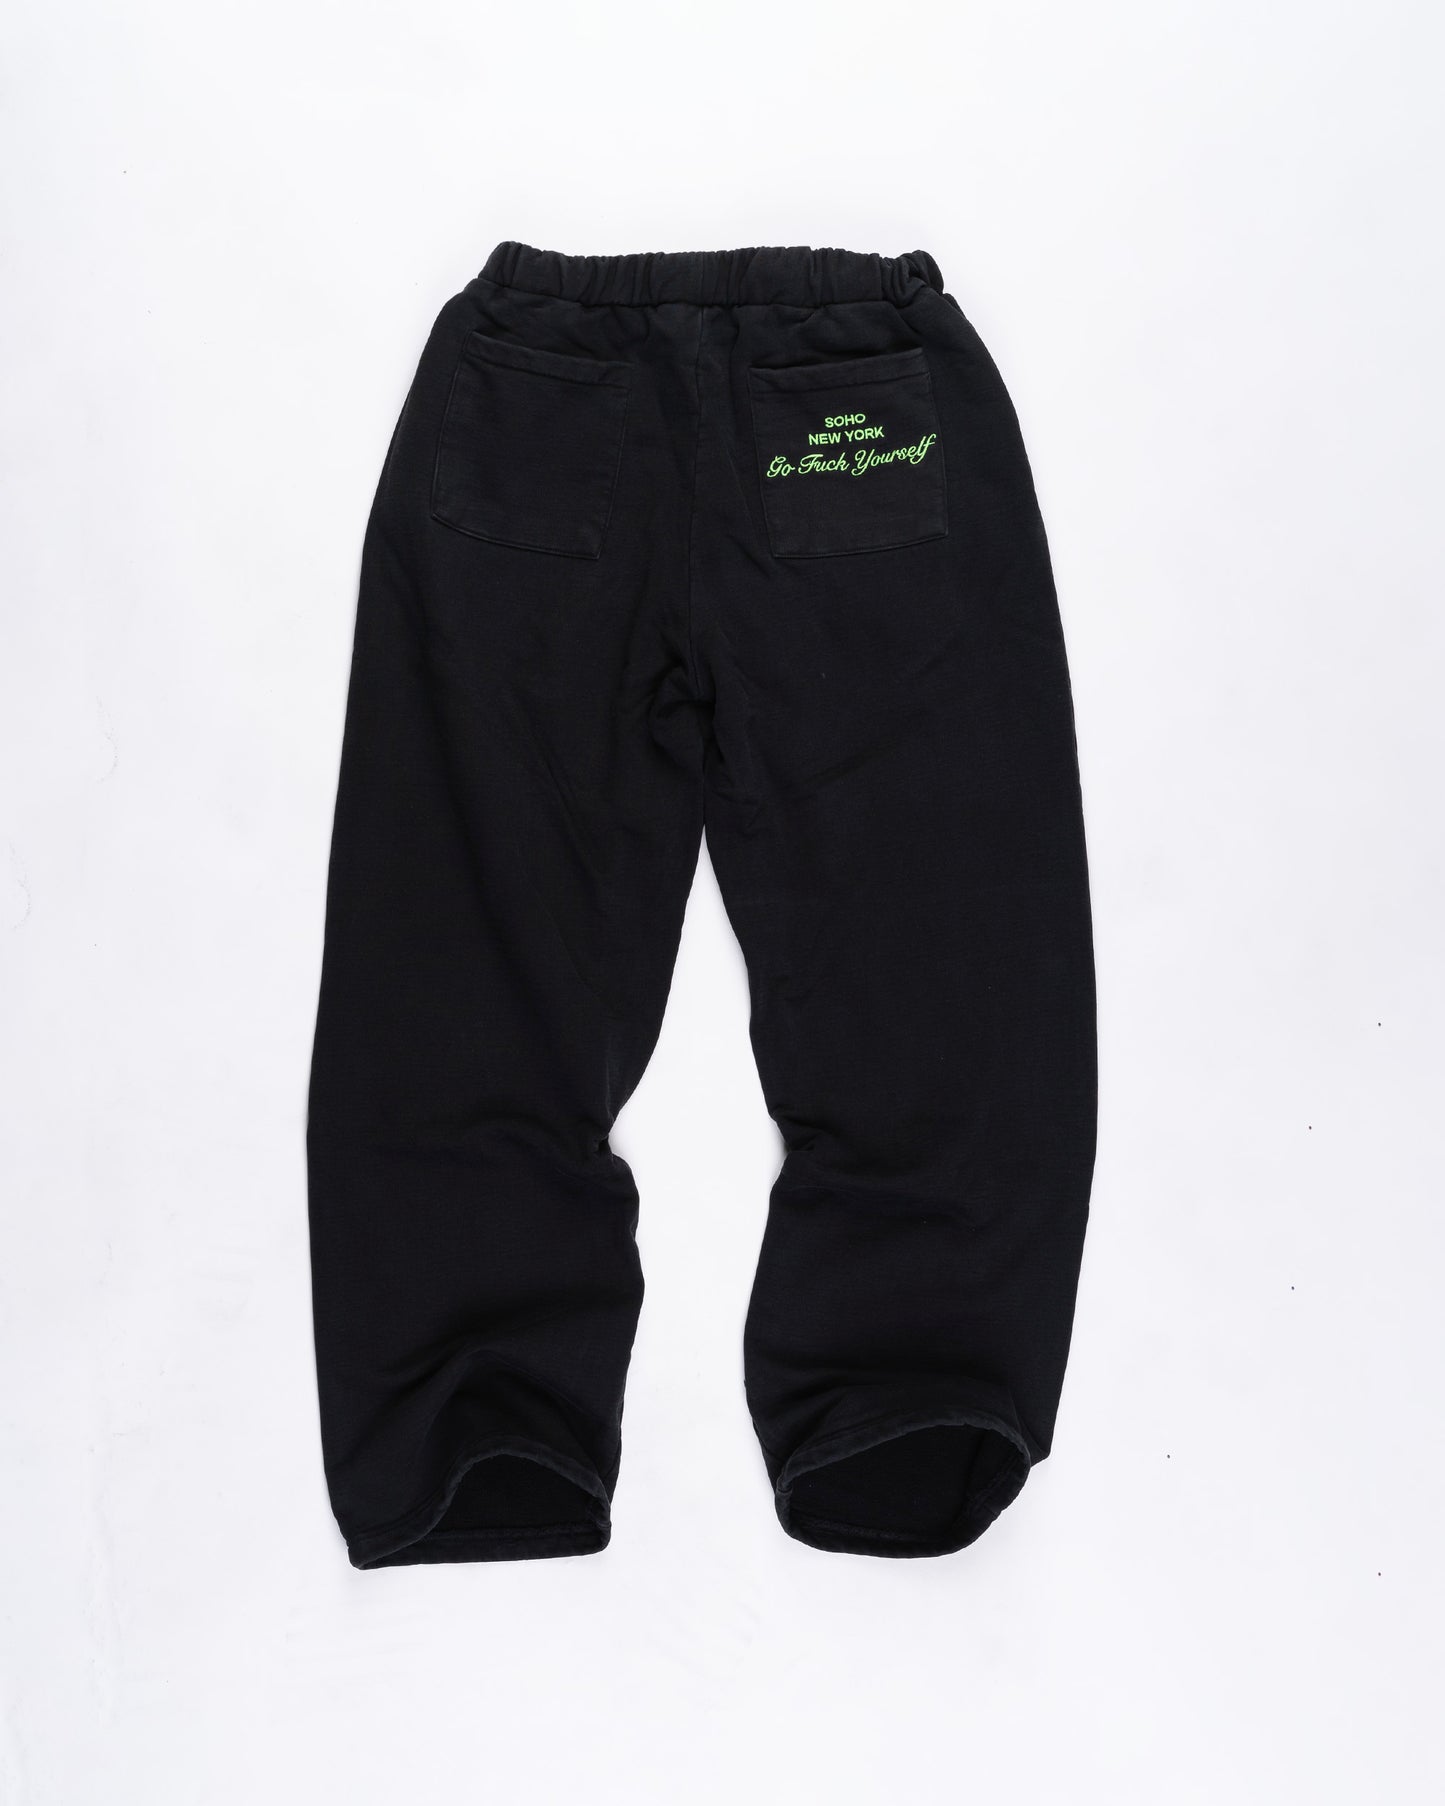 Black Embroidered 4G Sweats Size: Large